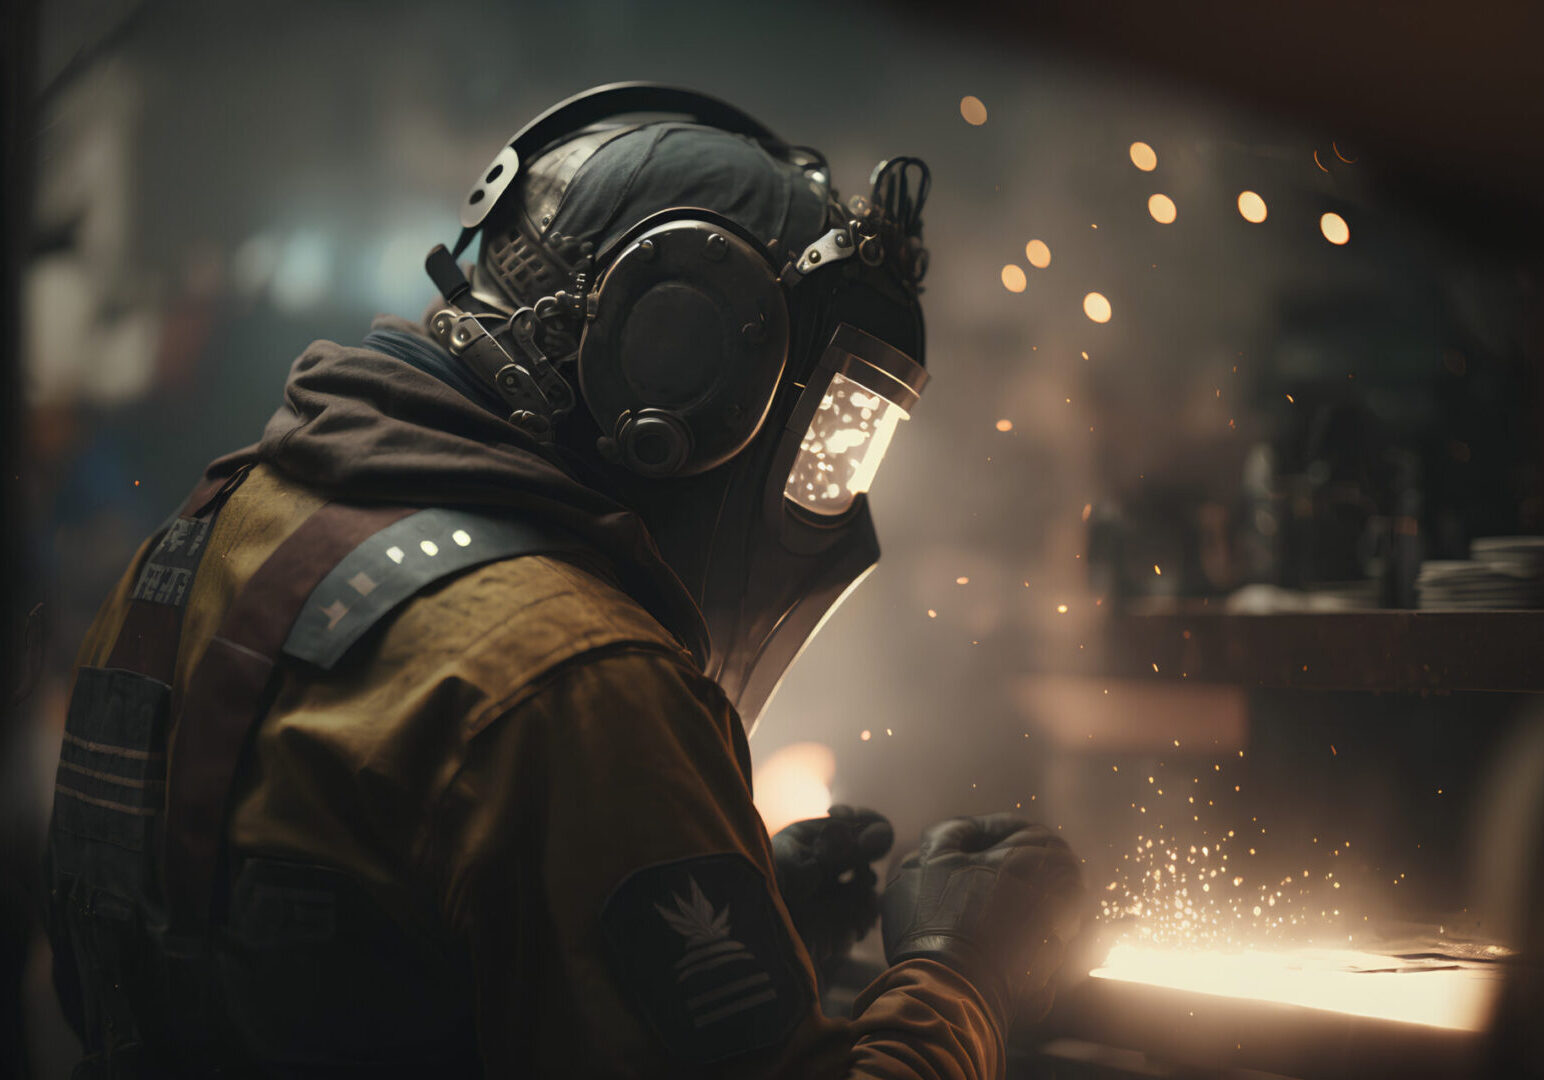 Worker in gas mask welding steel structure with sparks flying around him